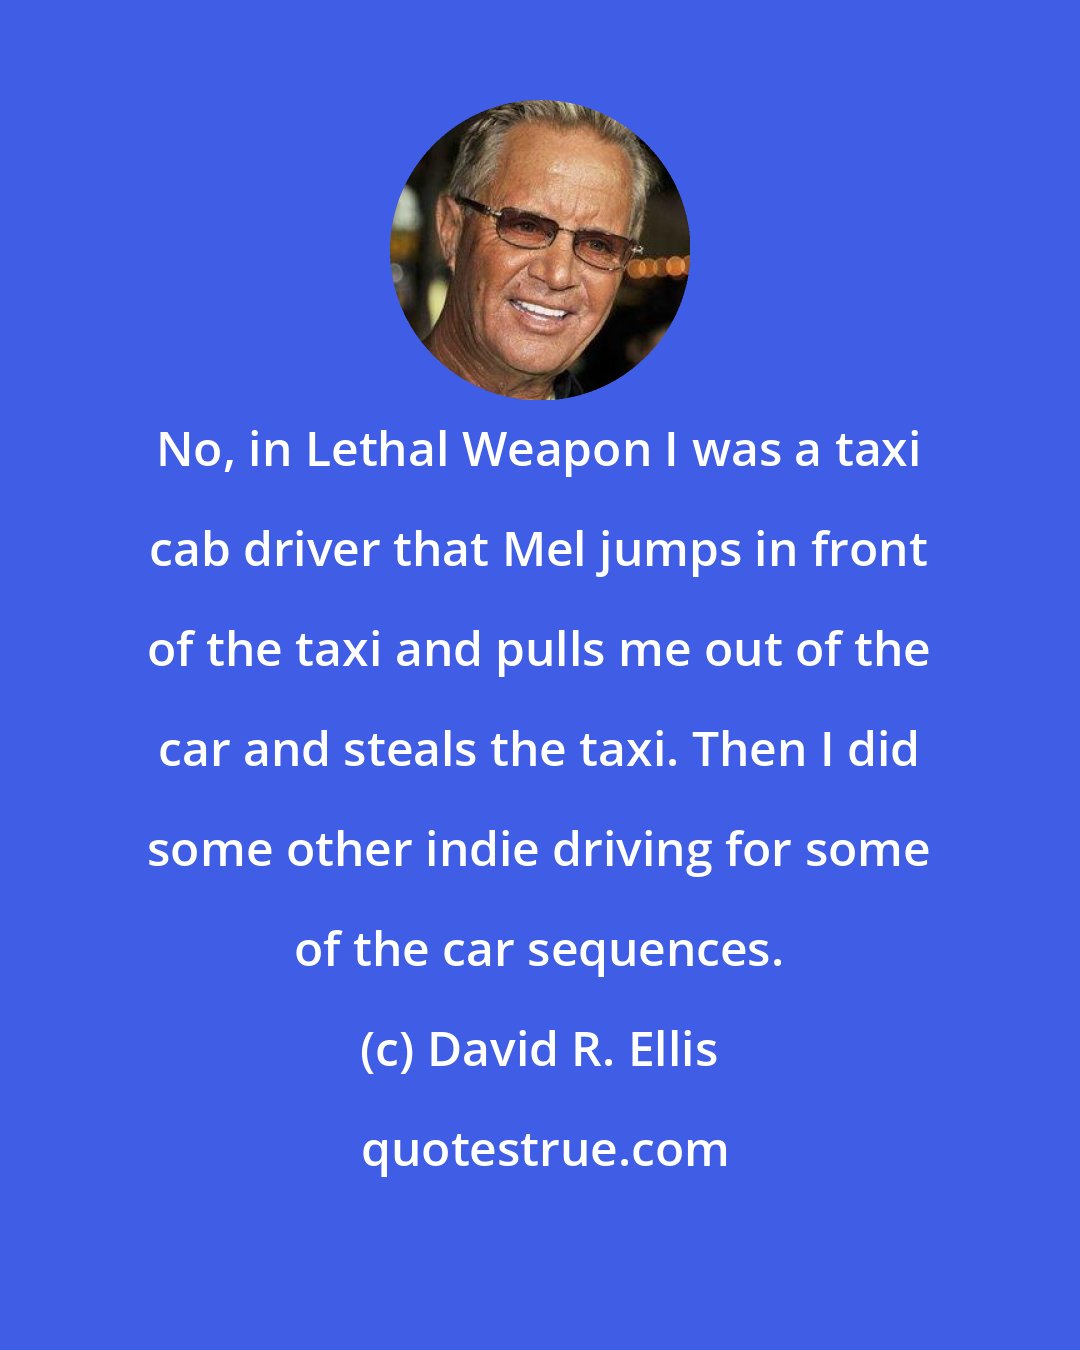 David R. Ellis: No, in Lethal Weapon I was a taxi cab driver that Mel jumps in front of the taxi and pulls me out of the car and steals the taxi. Then I did some other indie driving for some of the car sequences.